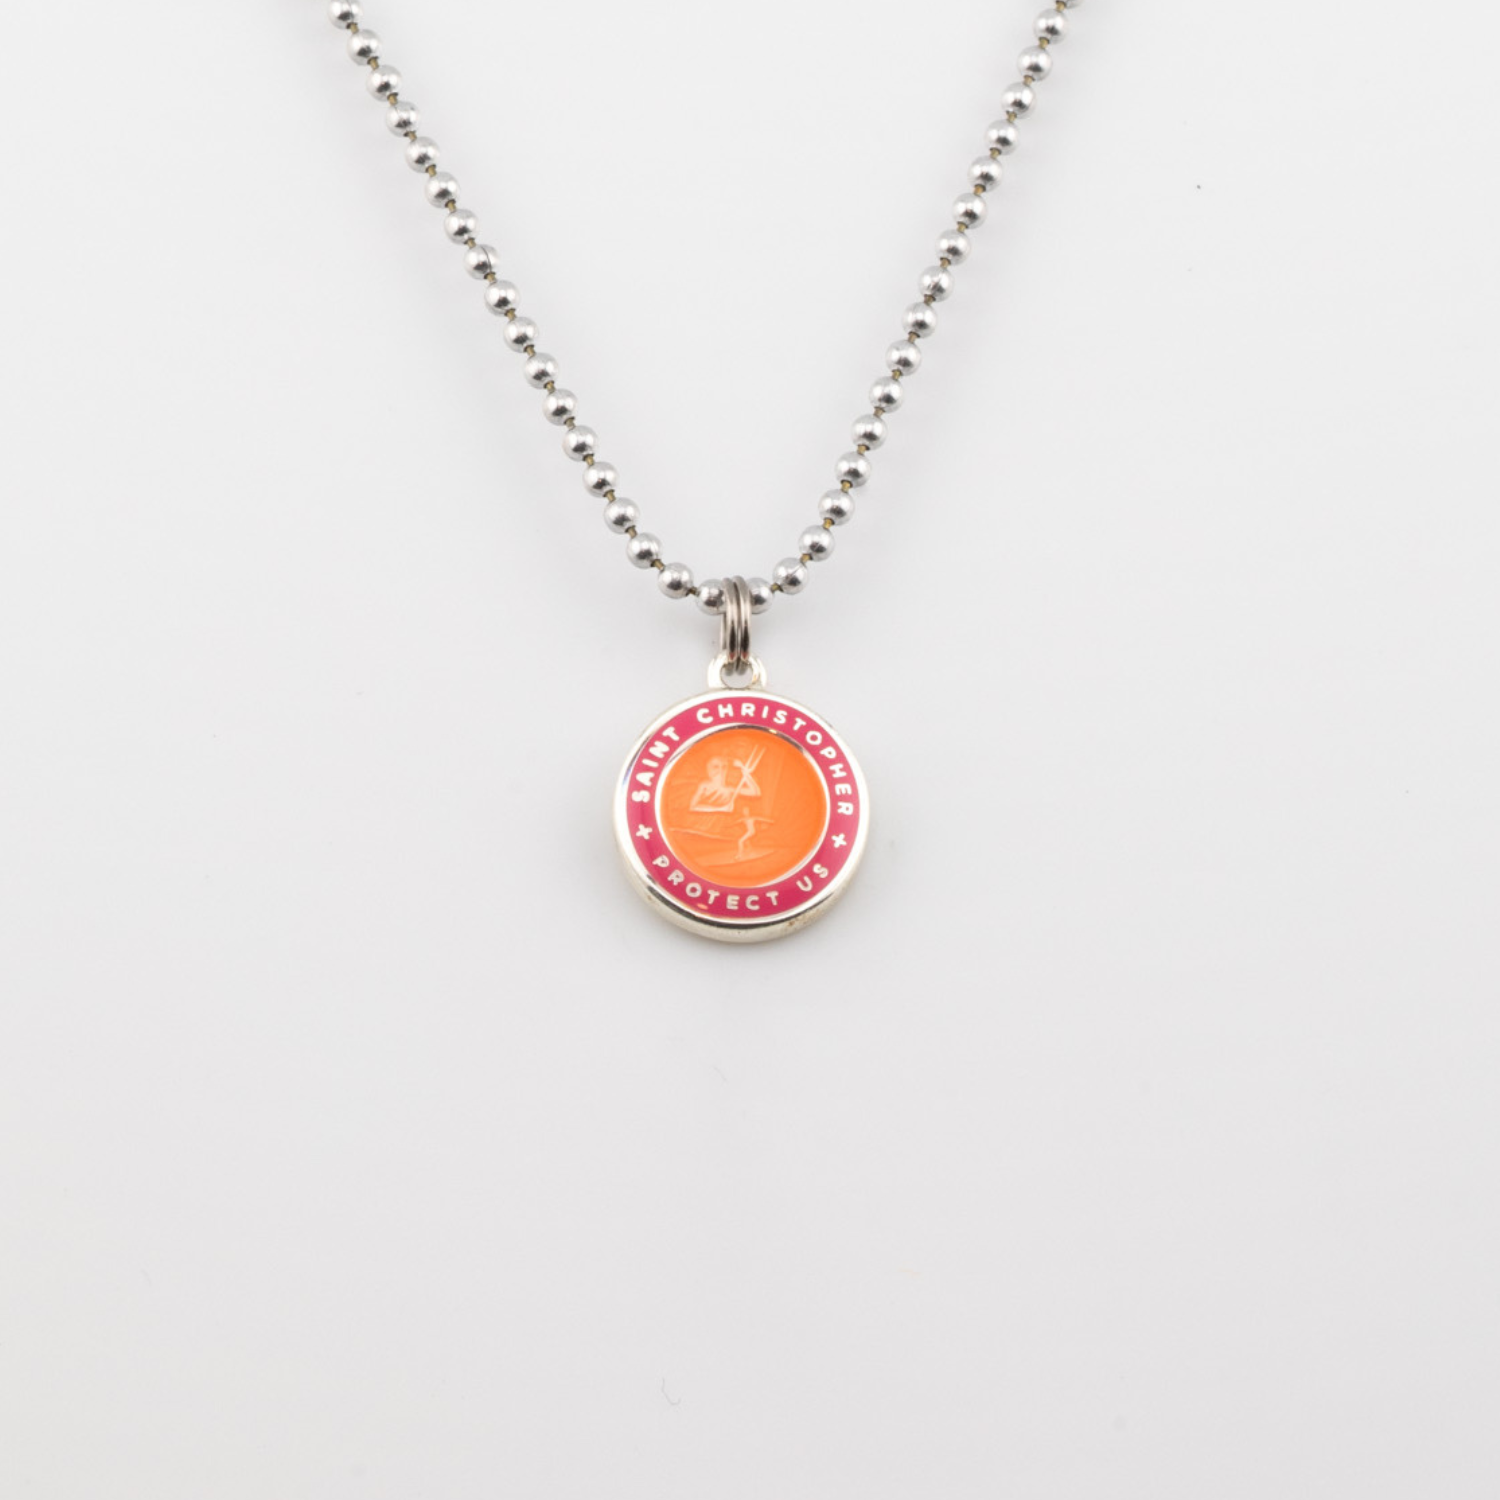 Small Orange Hot Pink St. Christopher 